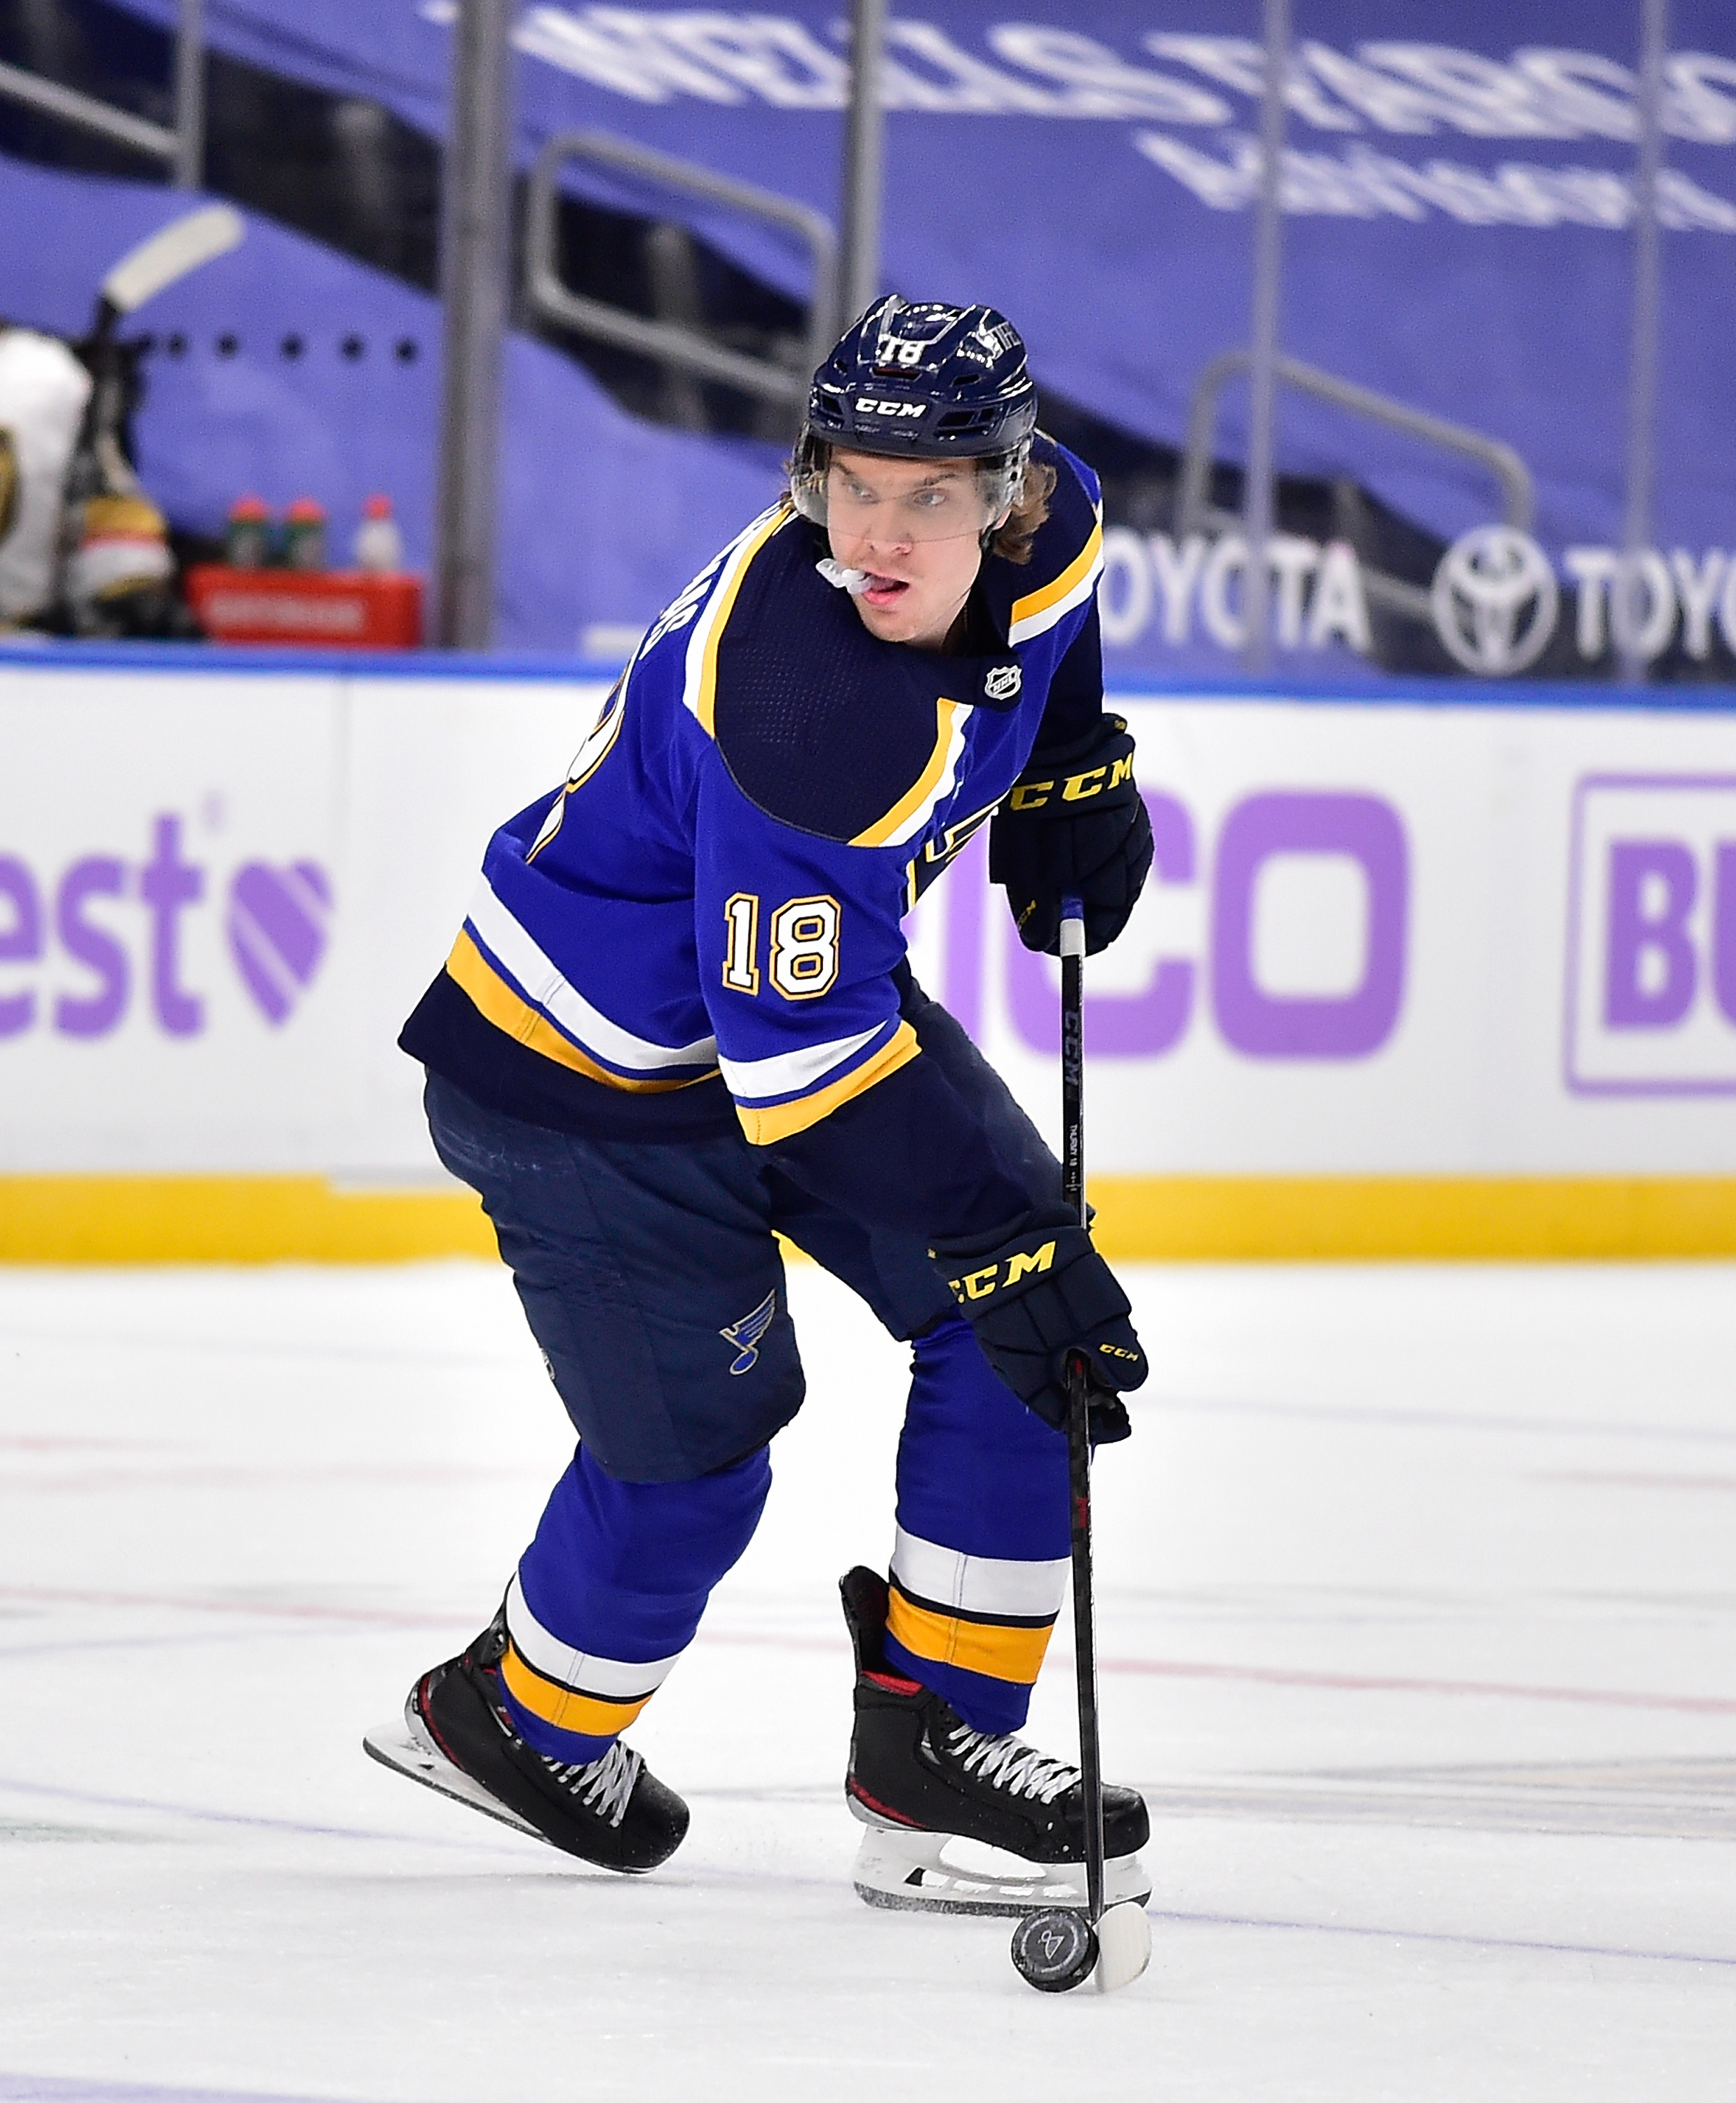 Jordan Kyrou signs two-year contract with the St. Louis Blues